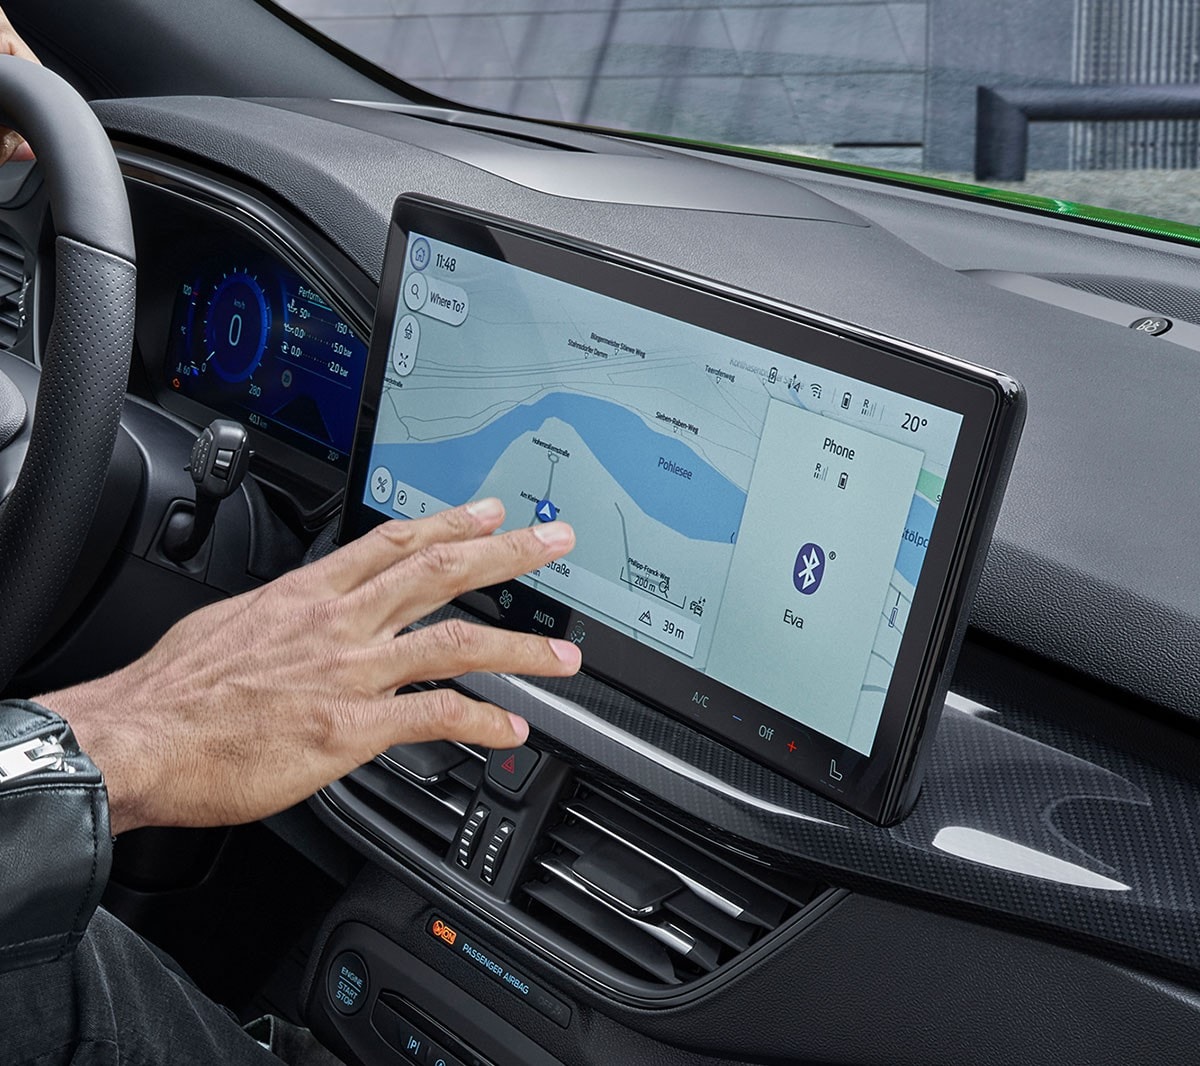 Hand interacting with a touchscreen on a dashboard